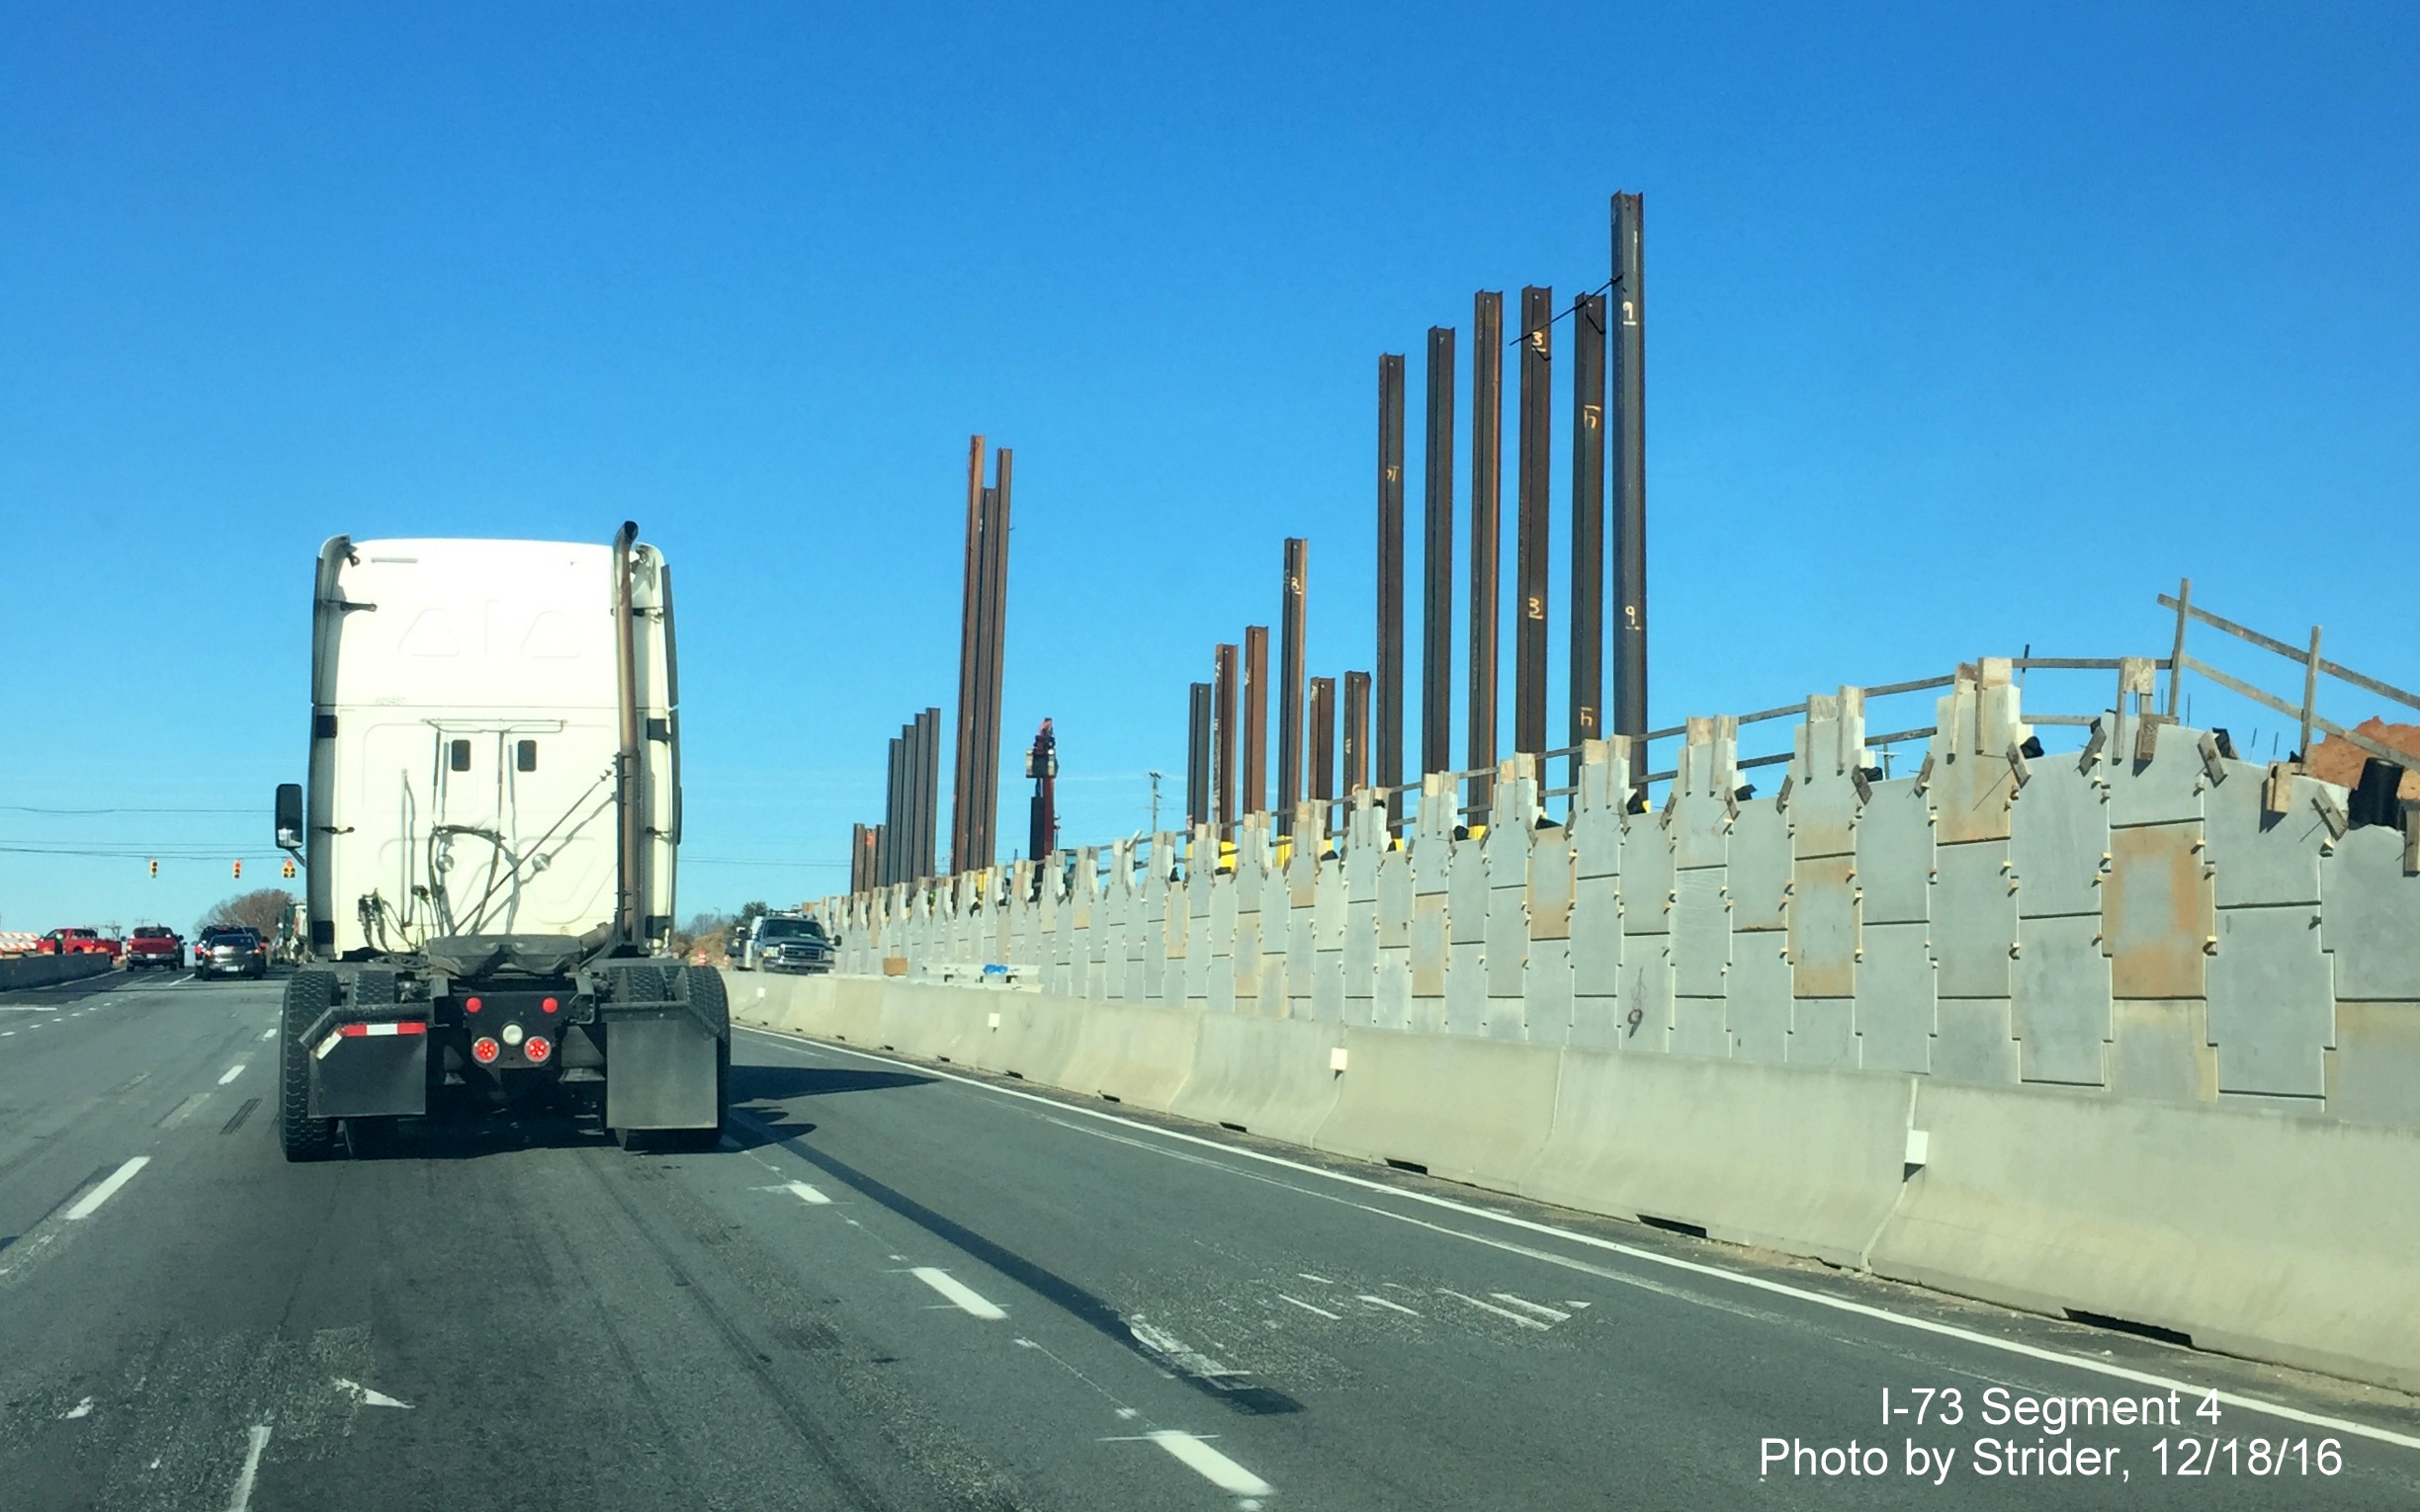 Image of bridges being built to carry I-73 traffic over NC 68 in Greensboro, from Strider